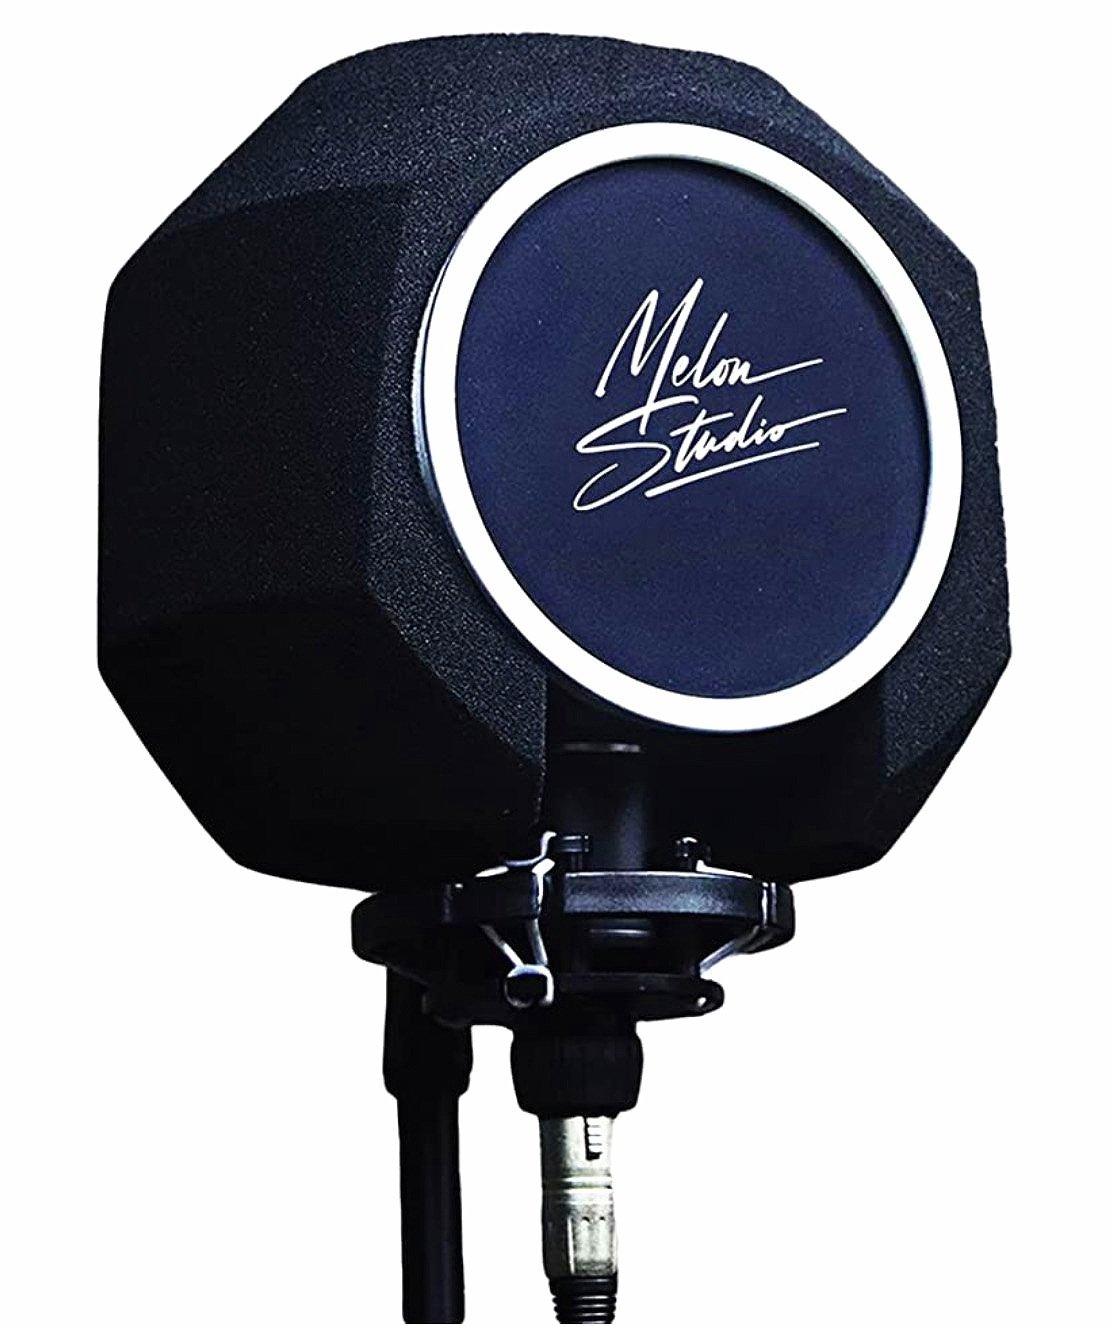 Melon Studio Microphone: Vocal Isolation and Noise Reducing Foam Booth